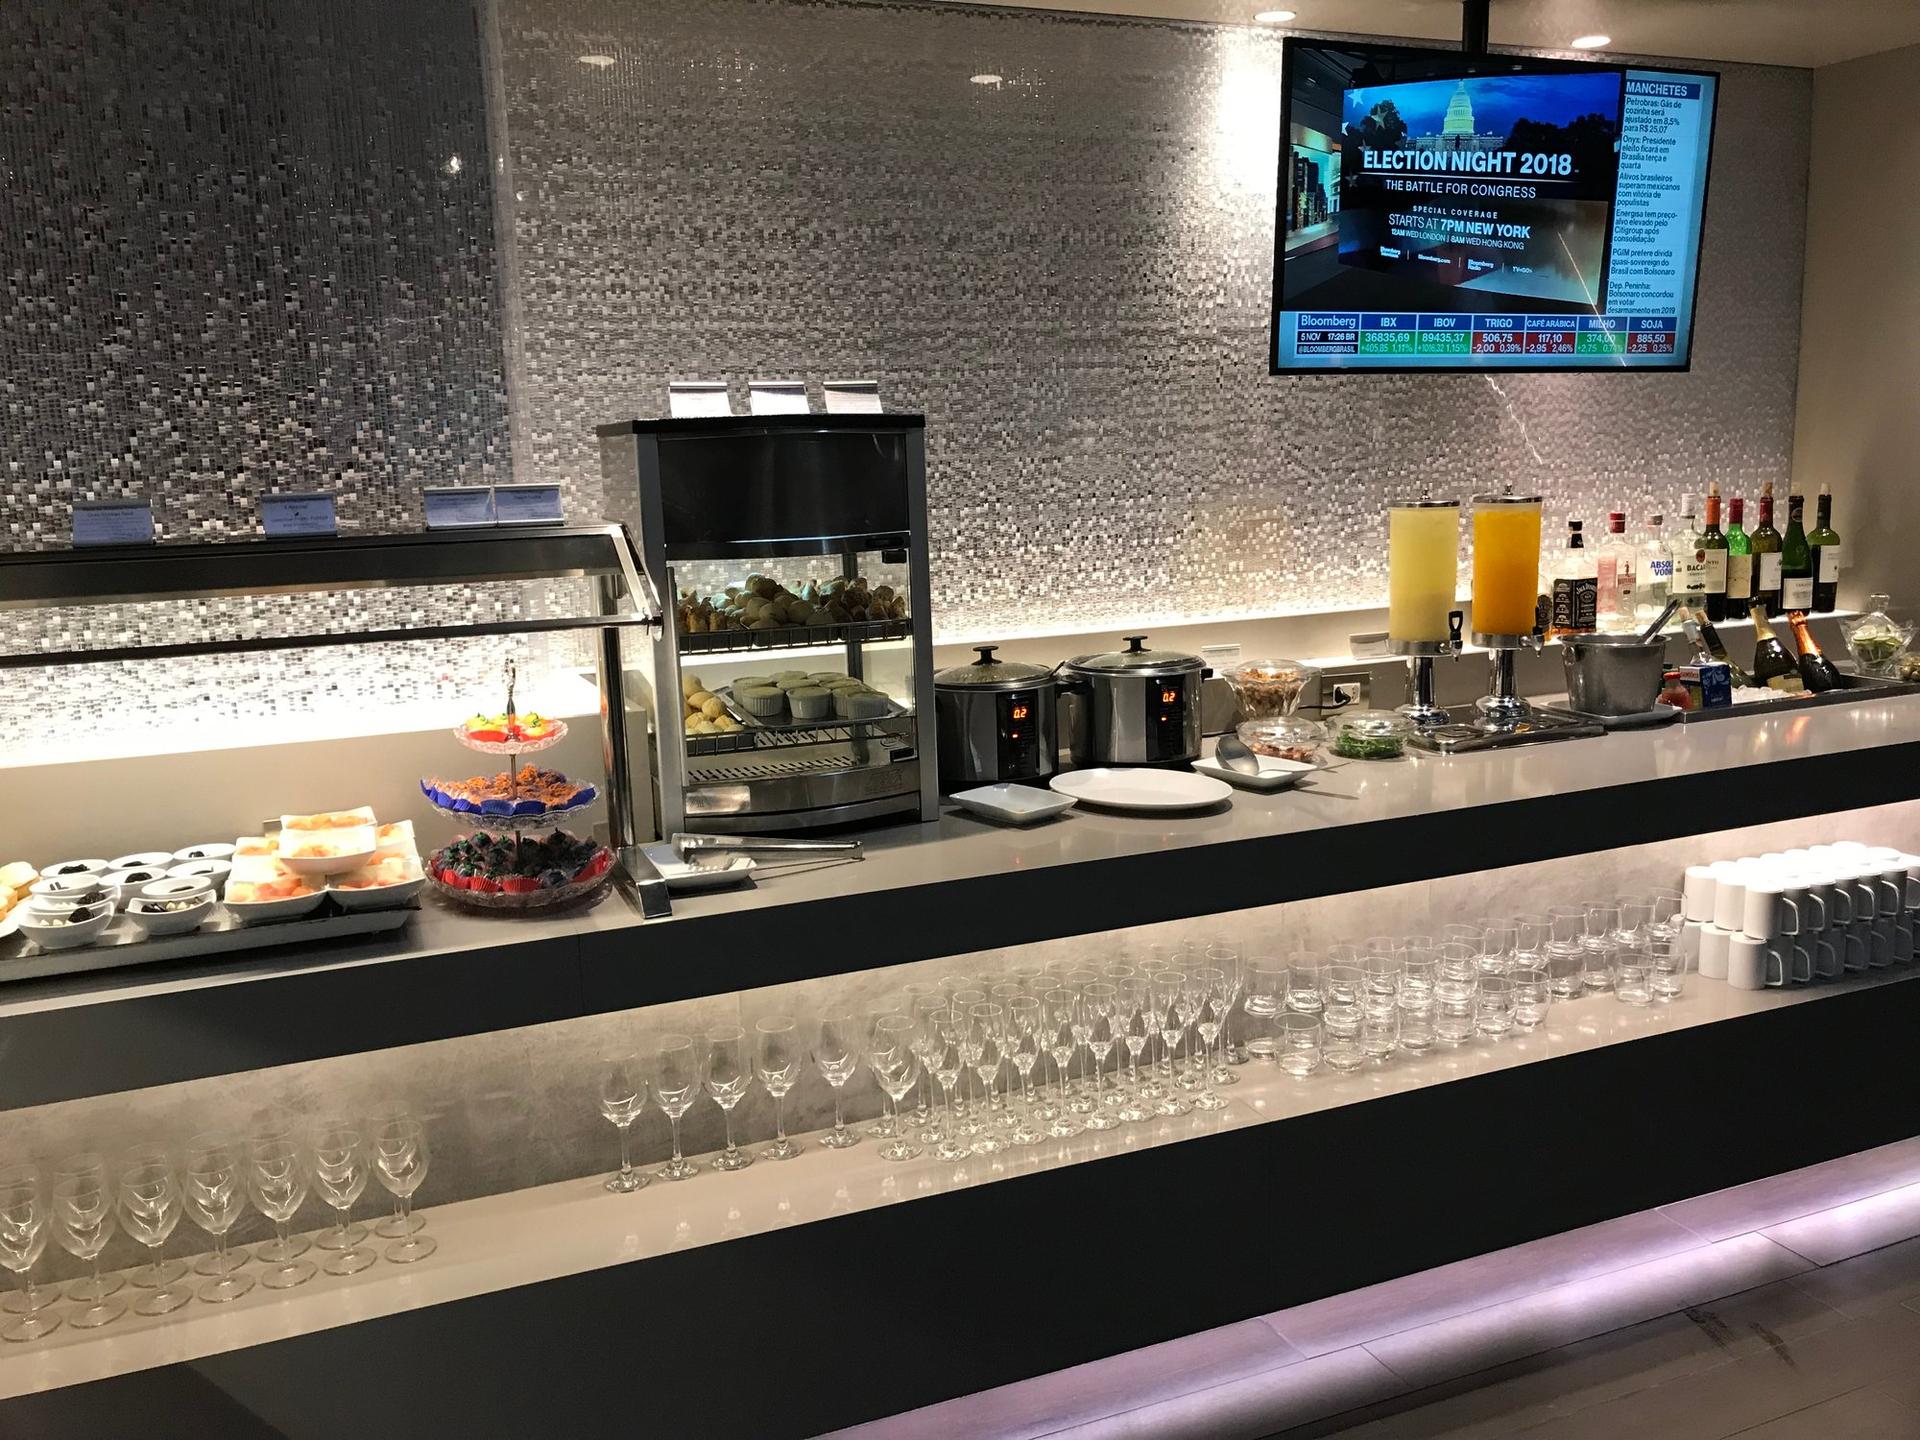 American Airlines Admirals Club image 8 of 30